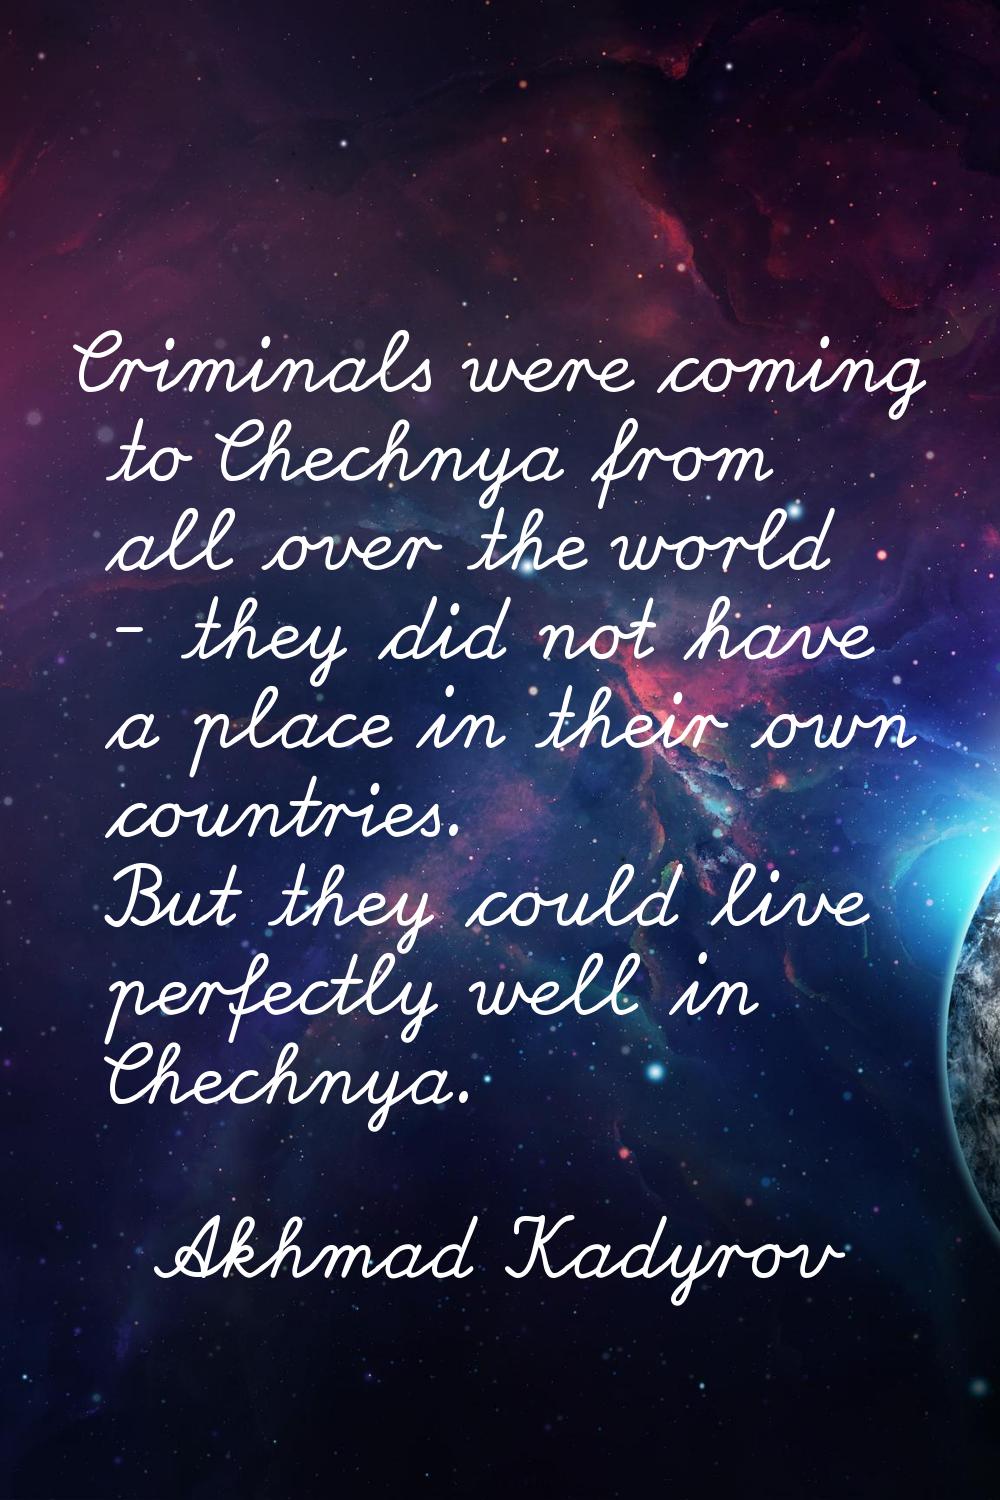 Criminals were coming to Chechnya from all over the world - they did not have a place in their own 